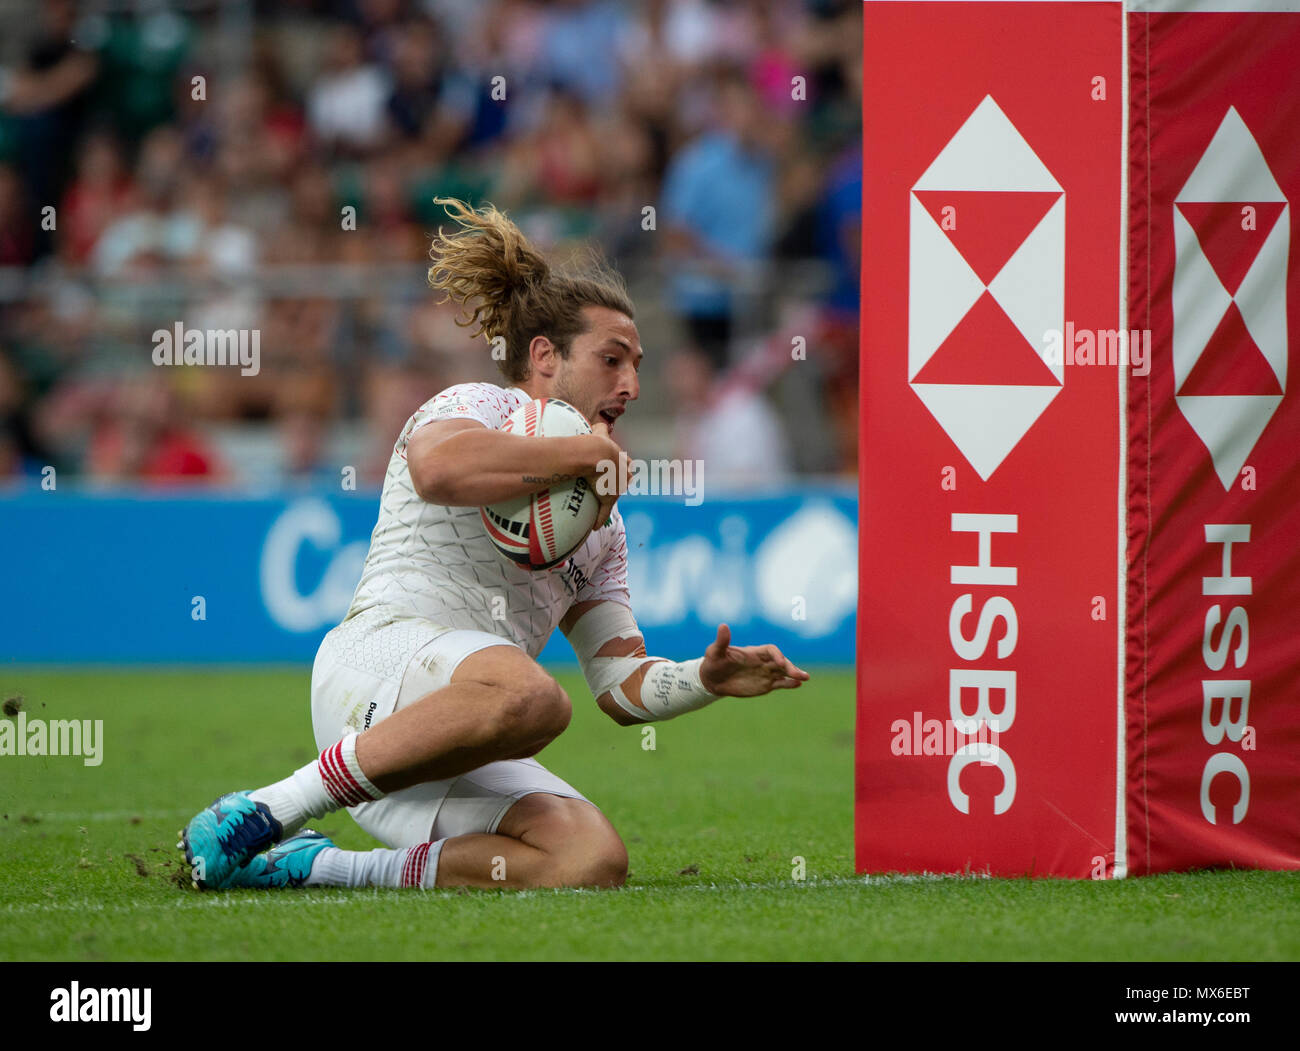 Twickenham, United Kingdom, 3rd June 2018, HSBC London Sevens Series, Game 44 Bronze Medal Game, Ireland vs England,   Englands, Dan BIBBY, touching down, to, score a try, during the Rugby 7's match, played at the RFU Stadium, Twickenham, England,    © Peter SPURRIER/Alamy Live News Stock Photo